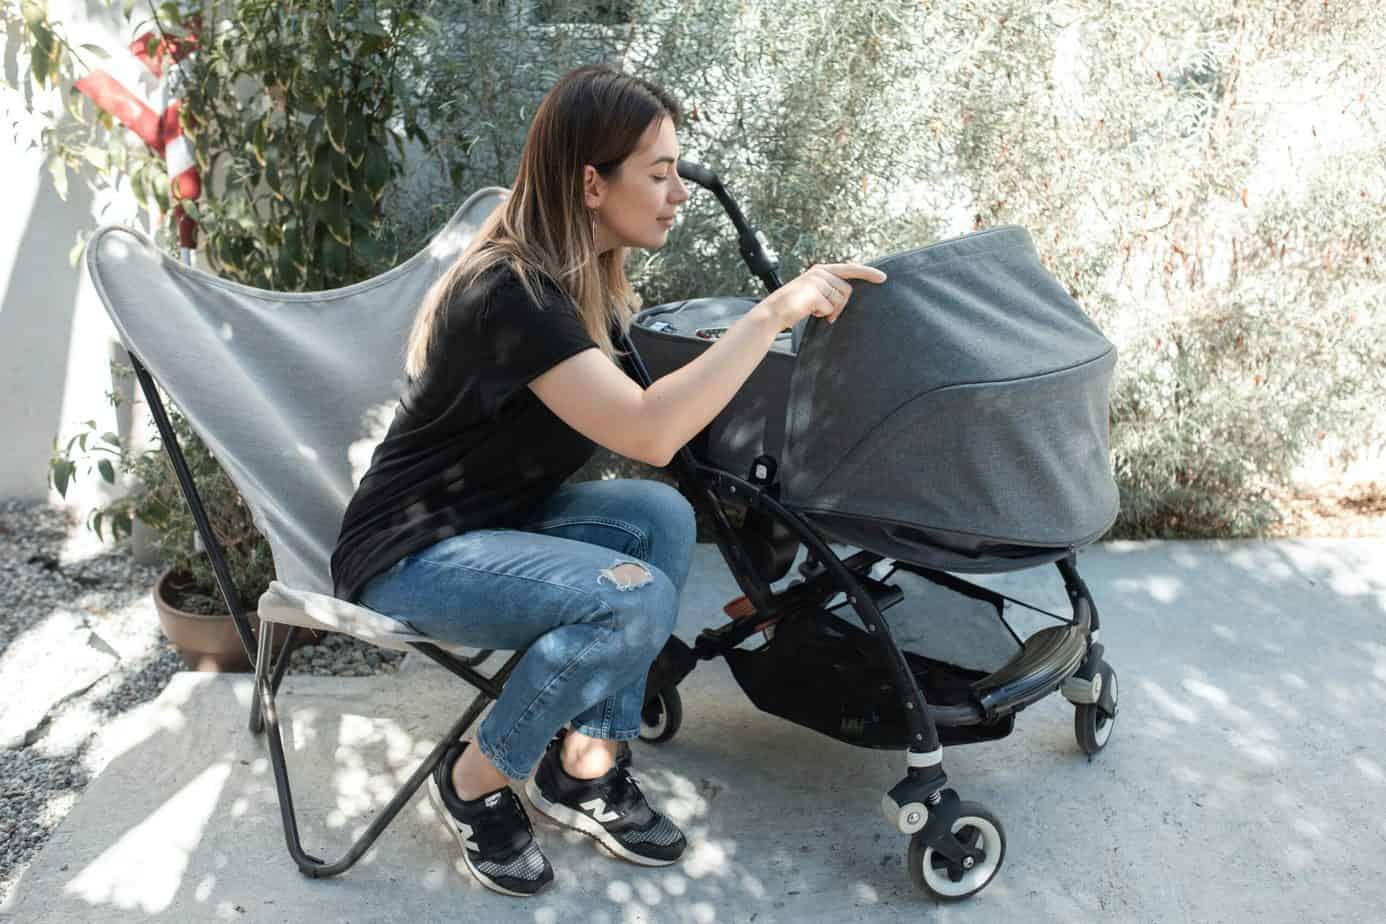 How To Clean A Bugaboo Stroller